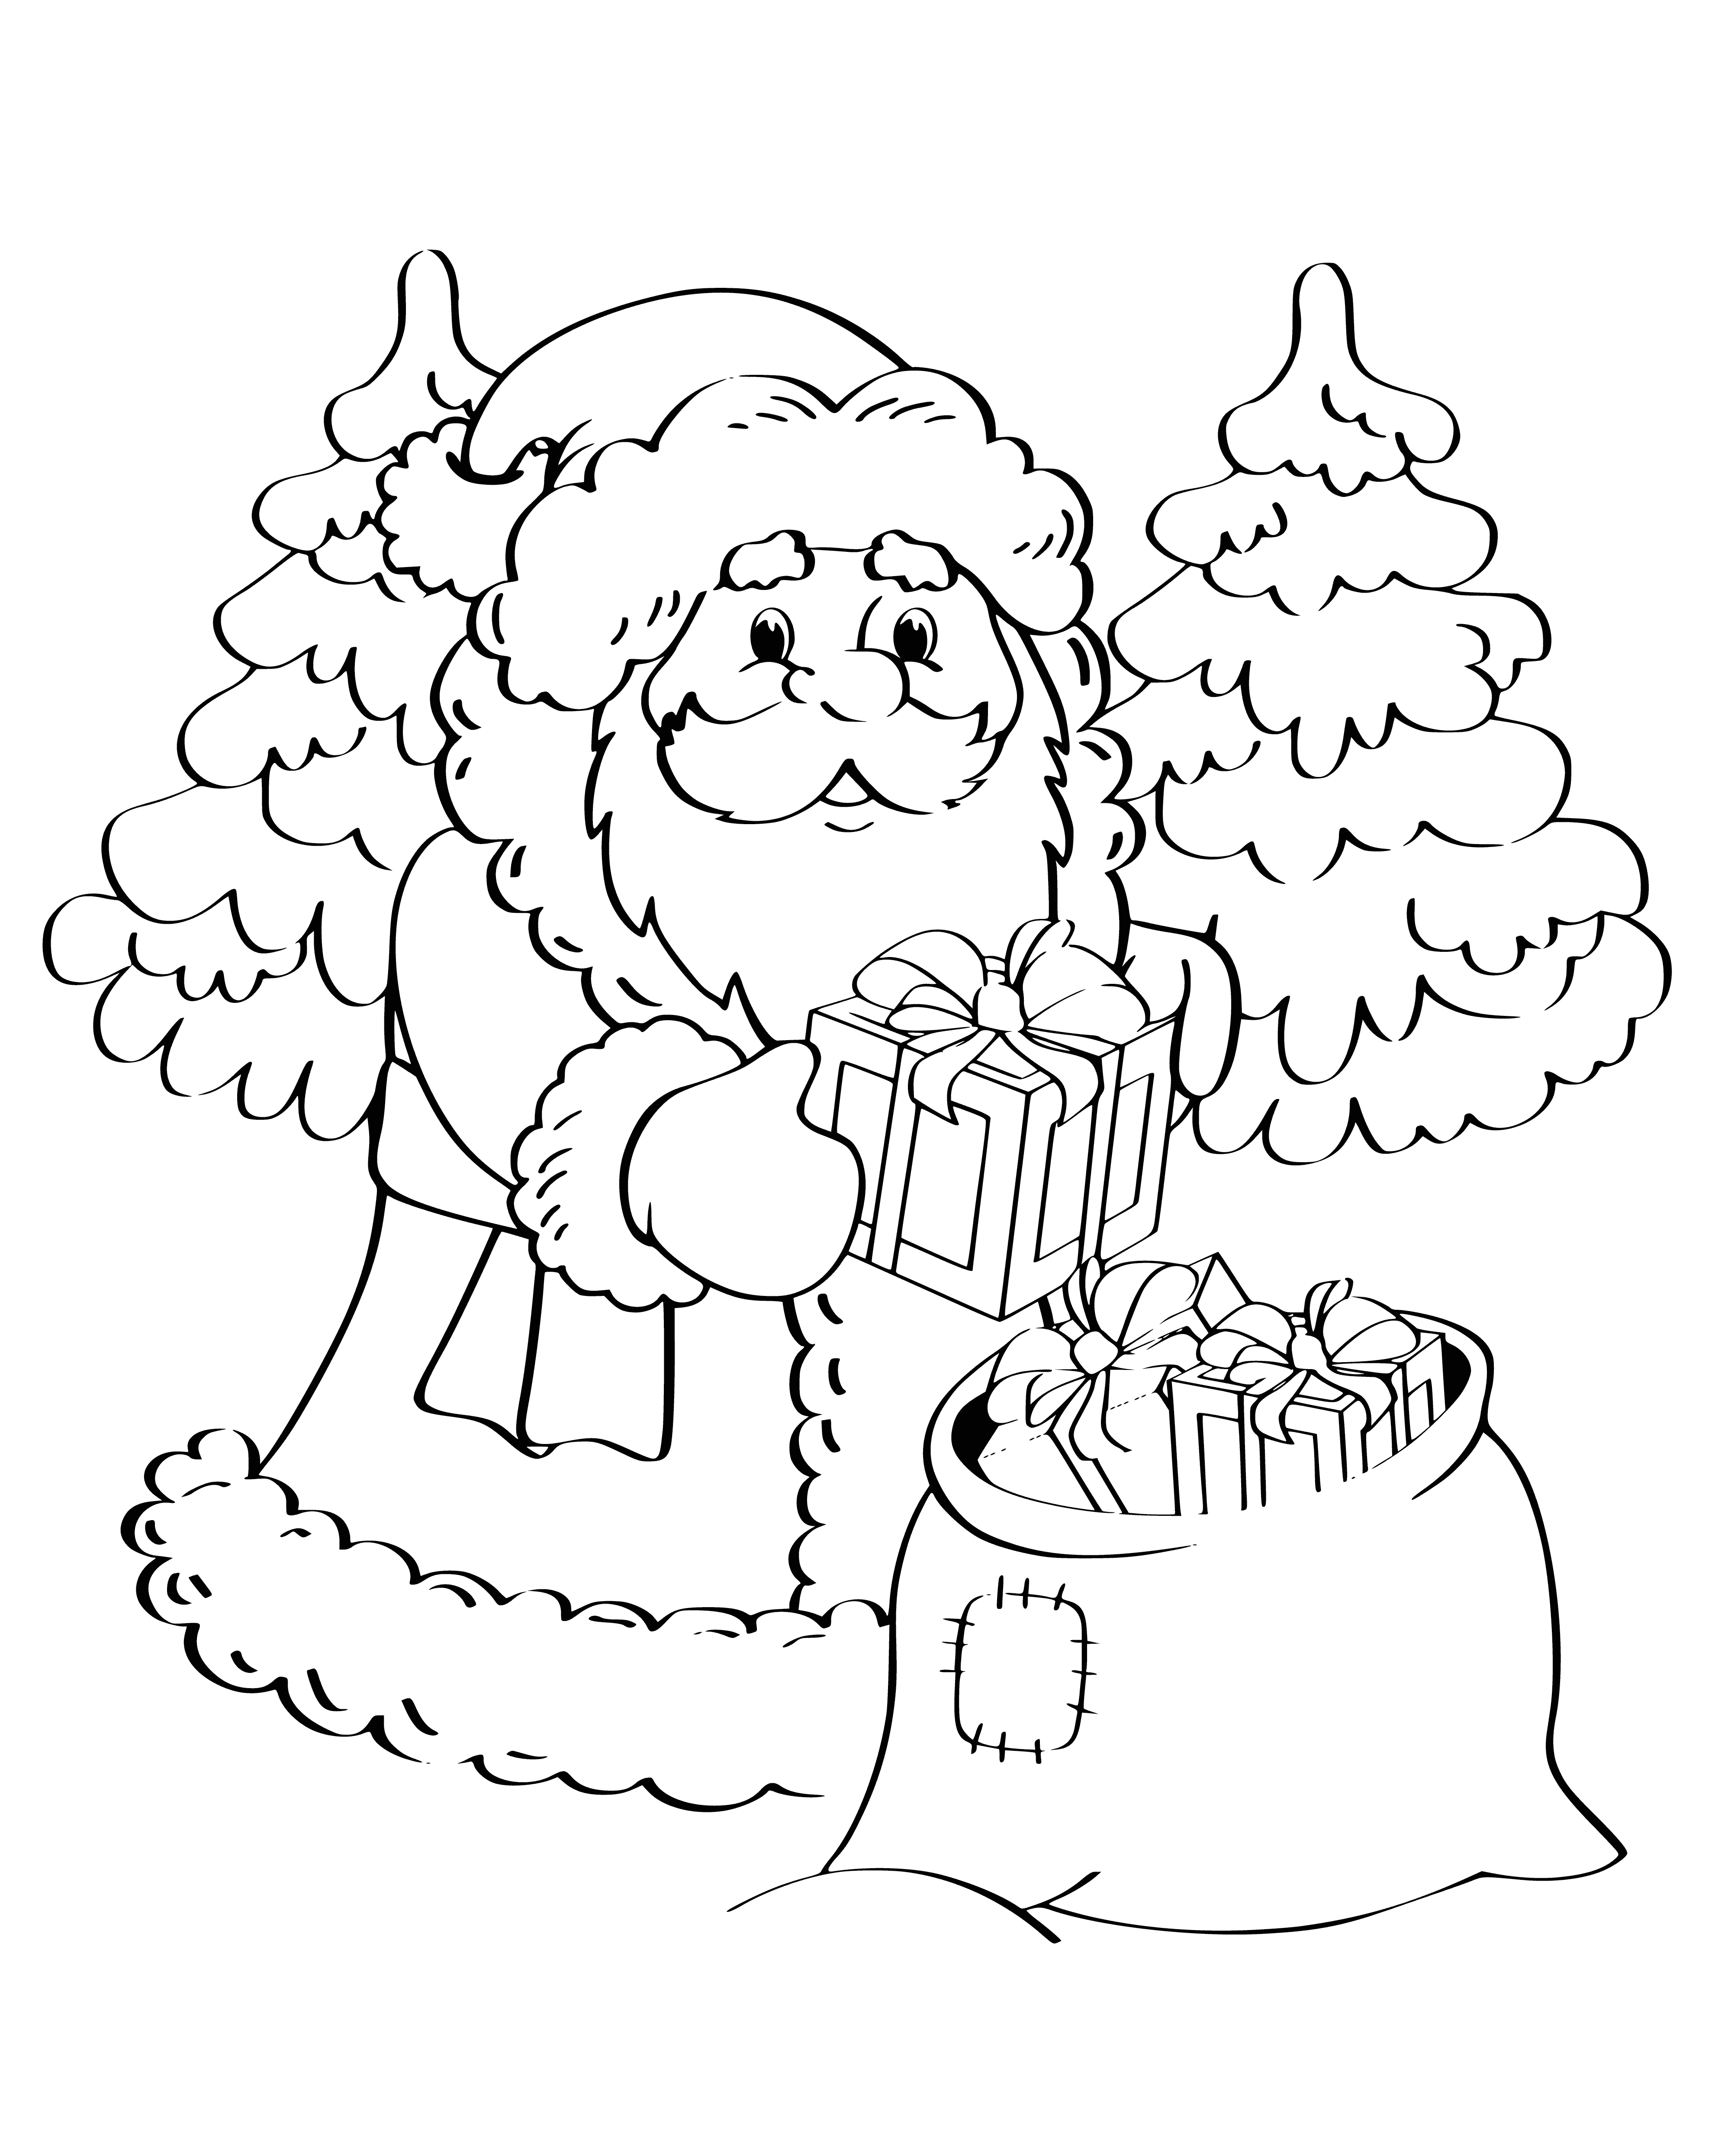 coloring page: Santa Claus in a red suit, festive sleigh and 8 reindeer feature on the coloring page; a happy Santa holding a candy cane and waving with twinkle in his eye.